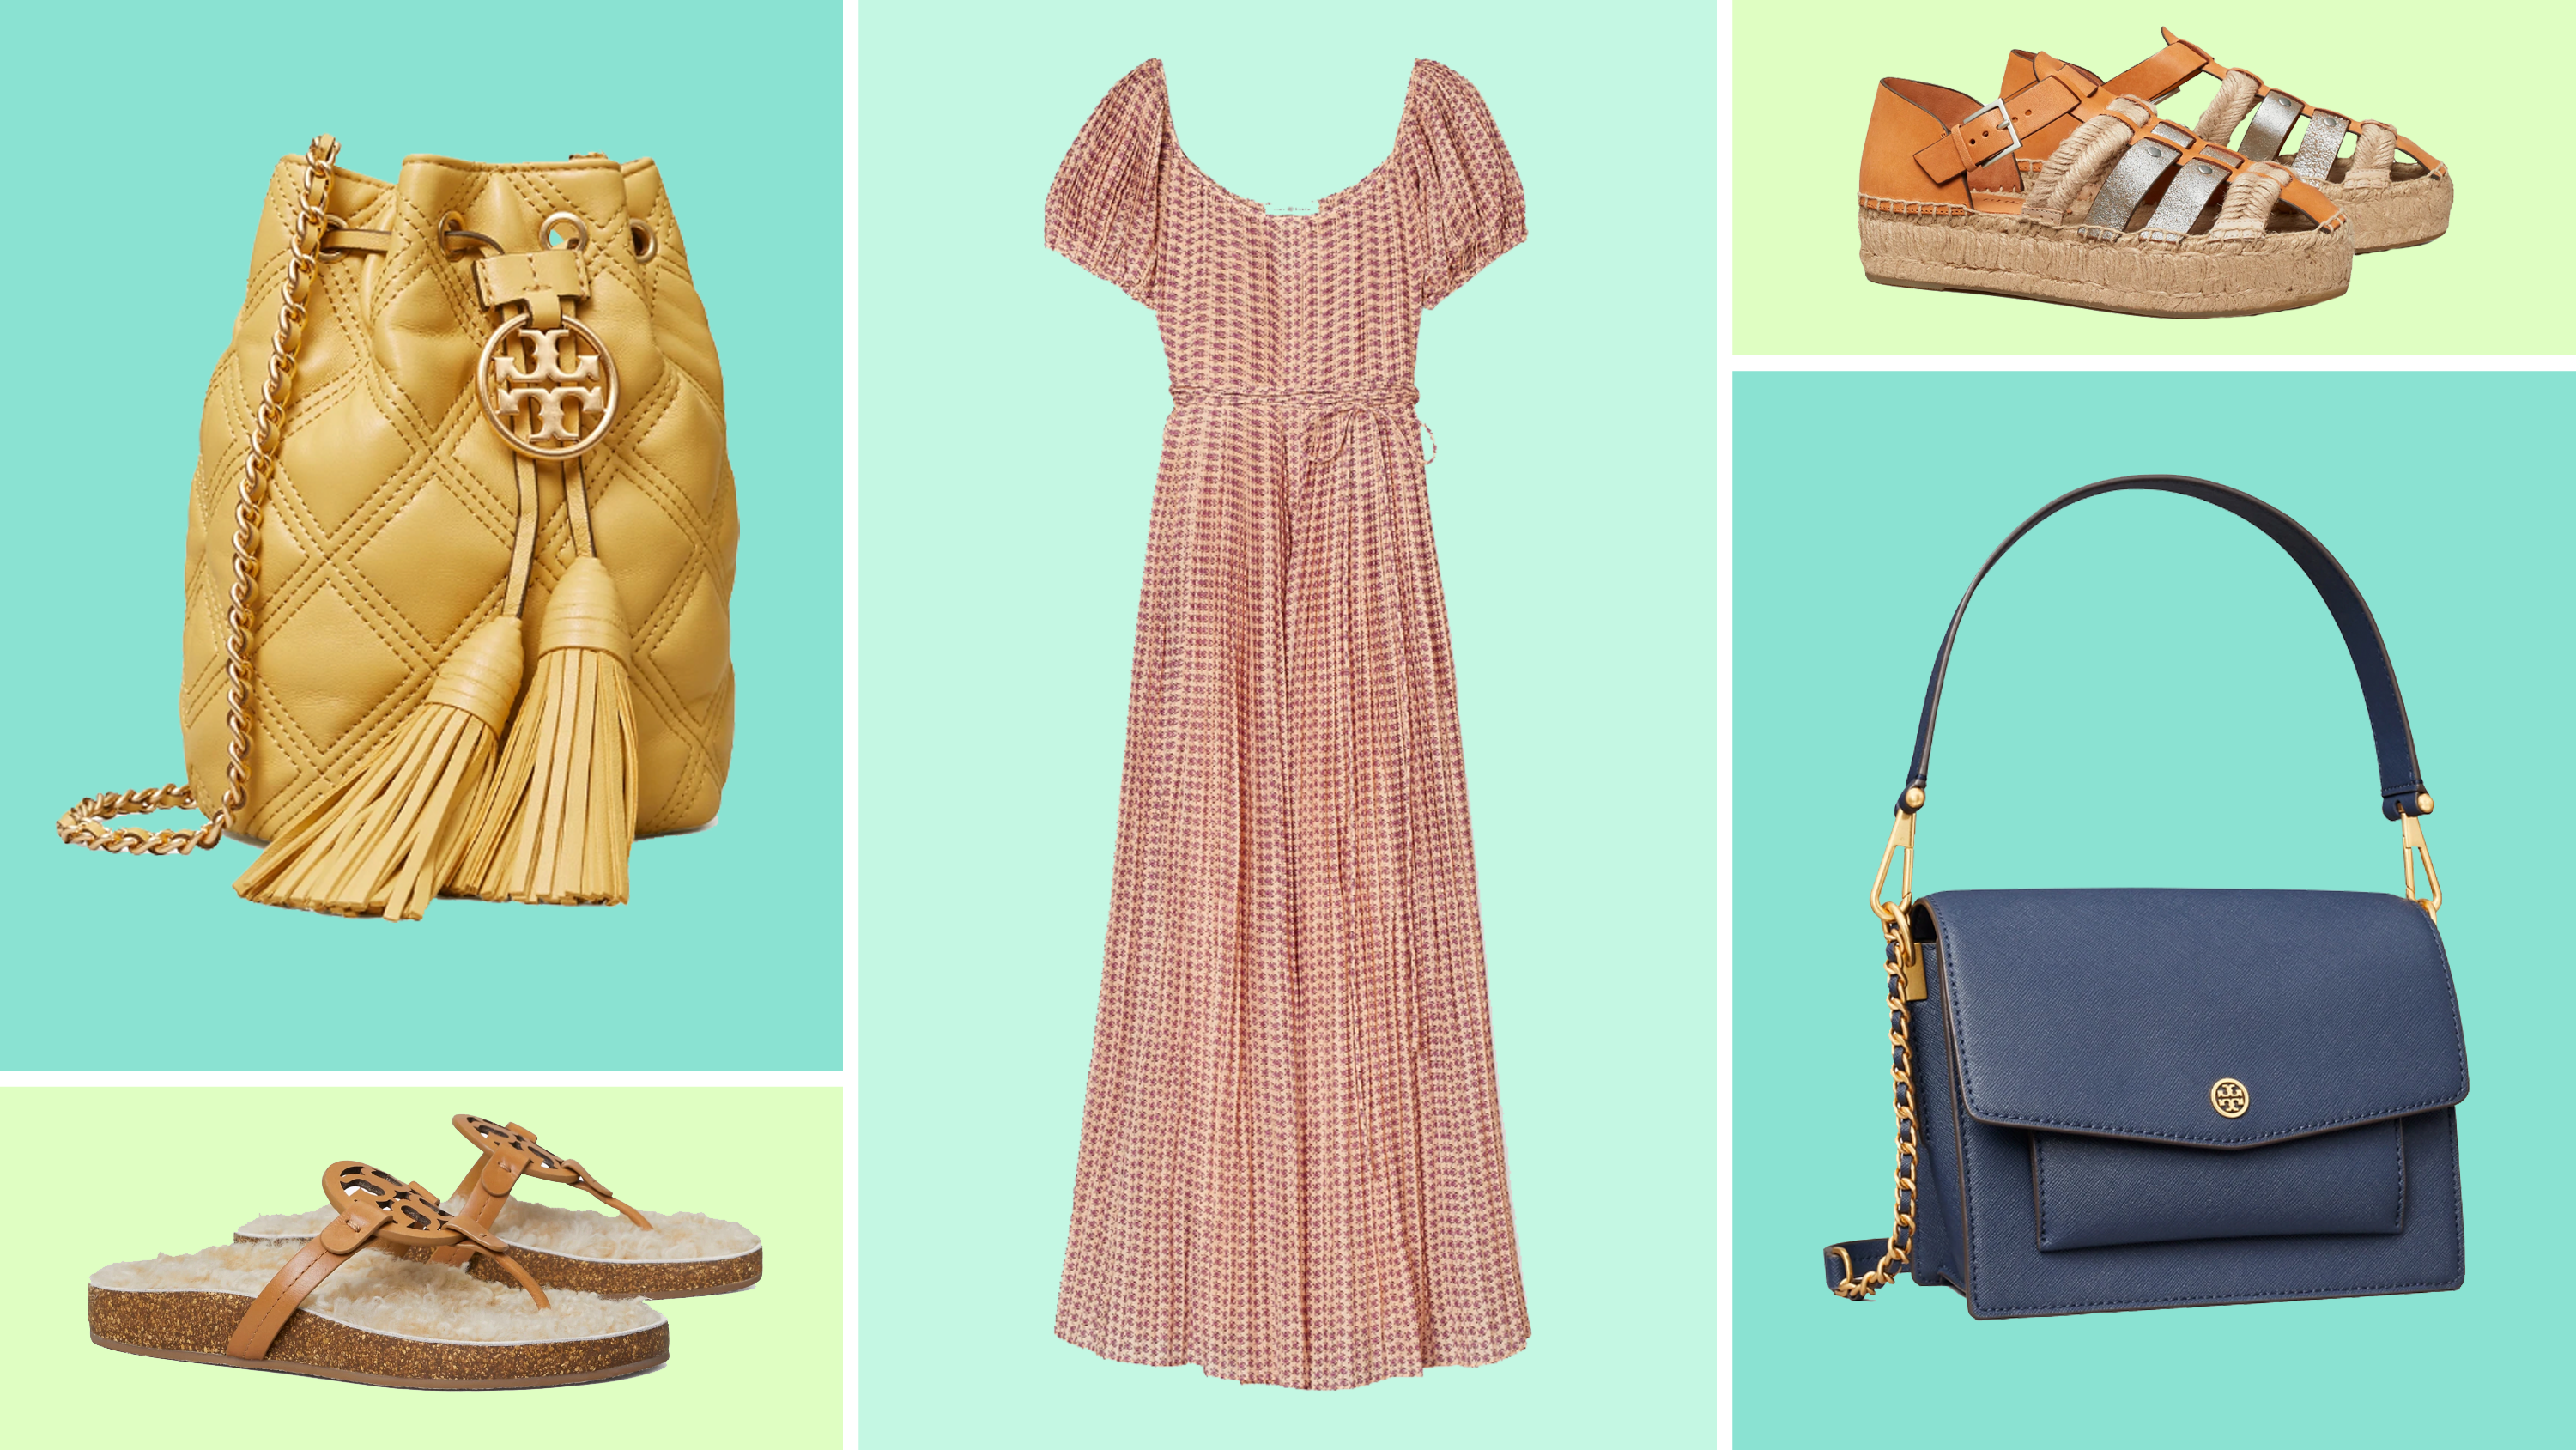 Tory Burch: Save on shoes, bags and clothes at the Semi-Annual sale